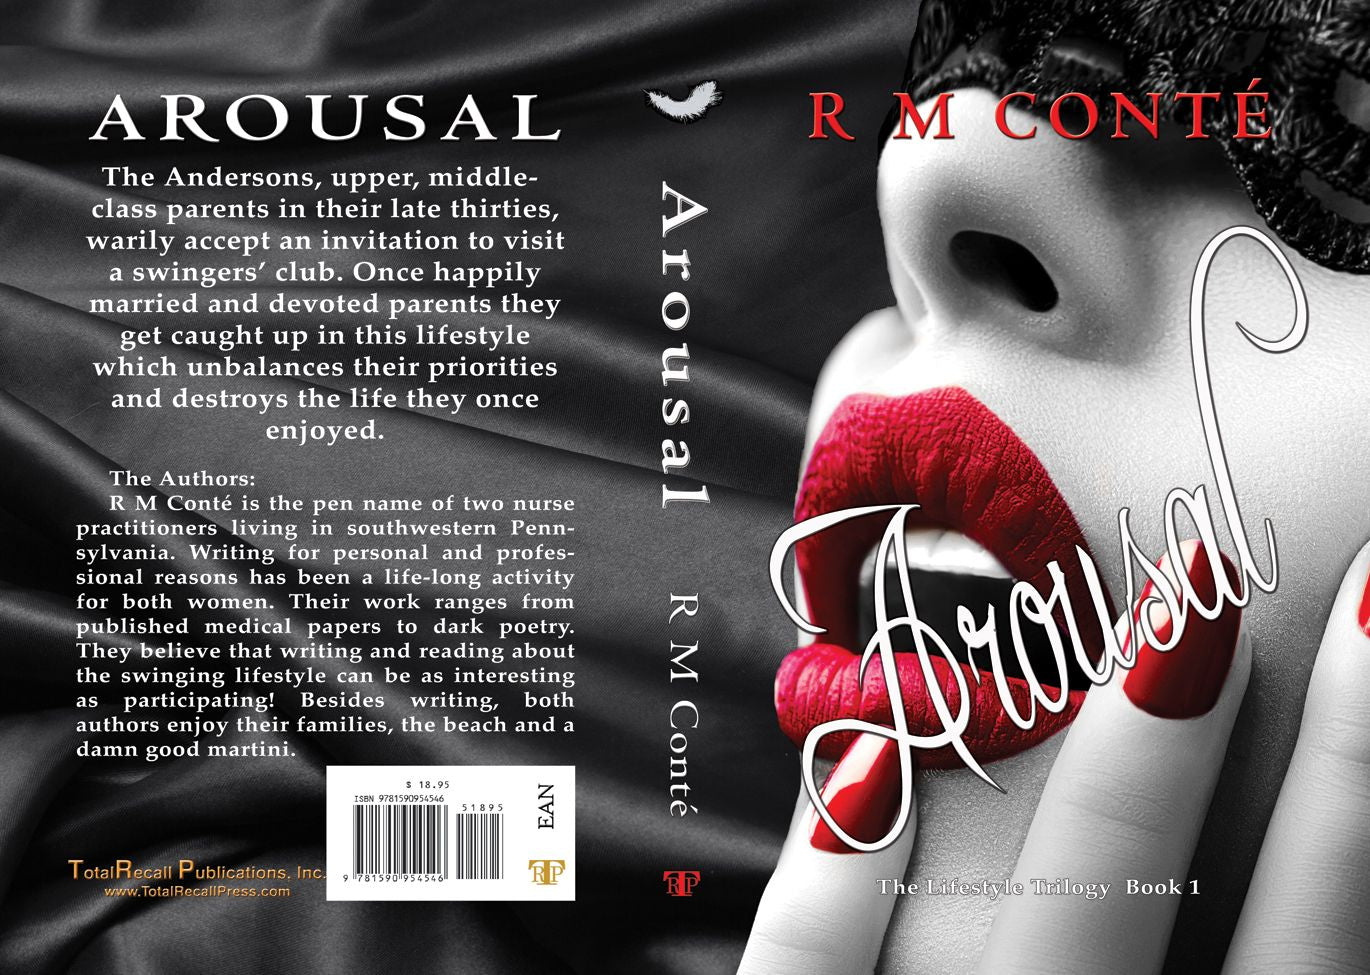 TaleFlick Marketplace AROUSAL (The Lifestyle Trilogy Book 1) by R M Conté